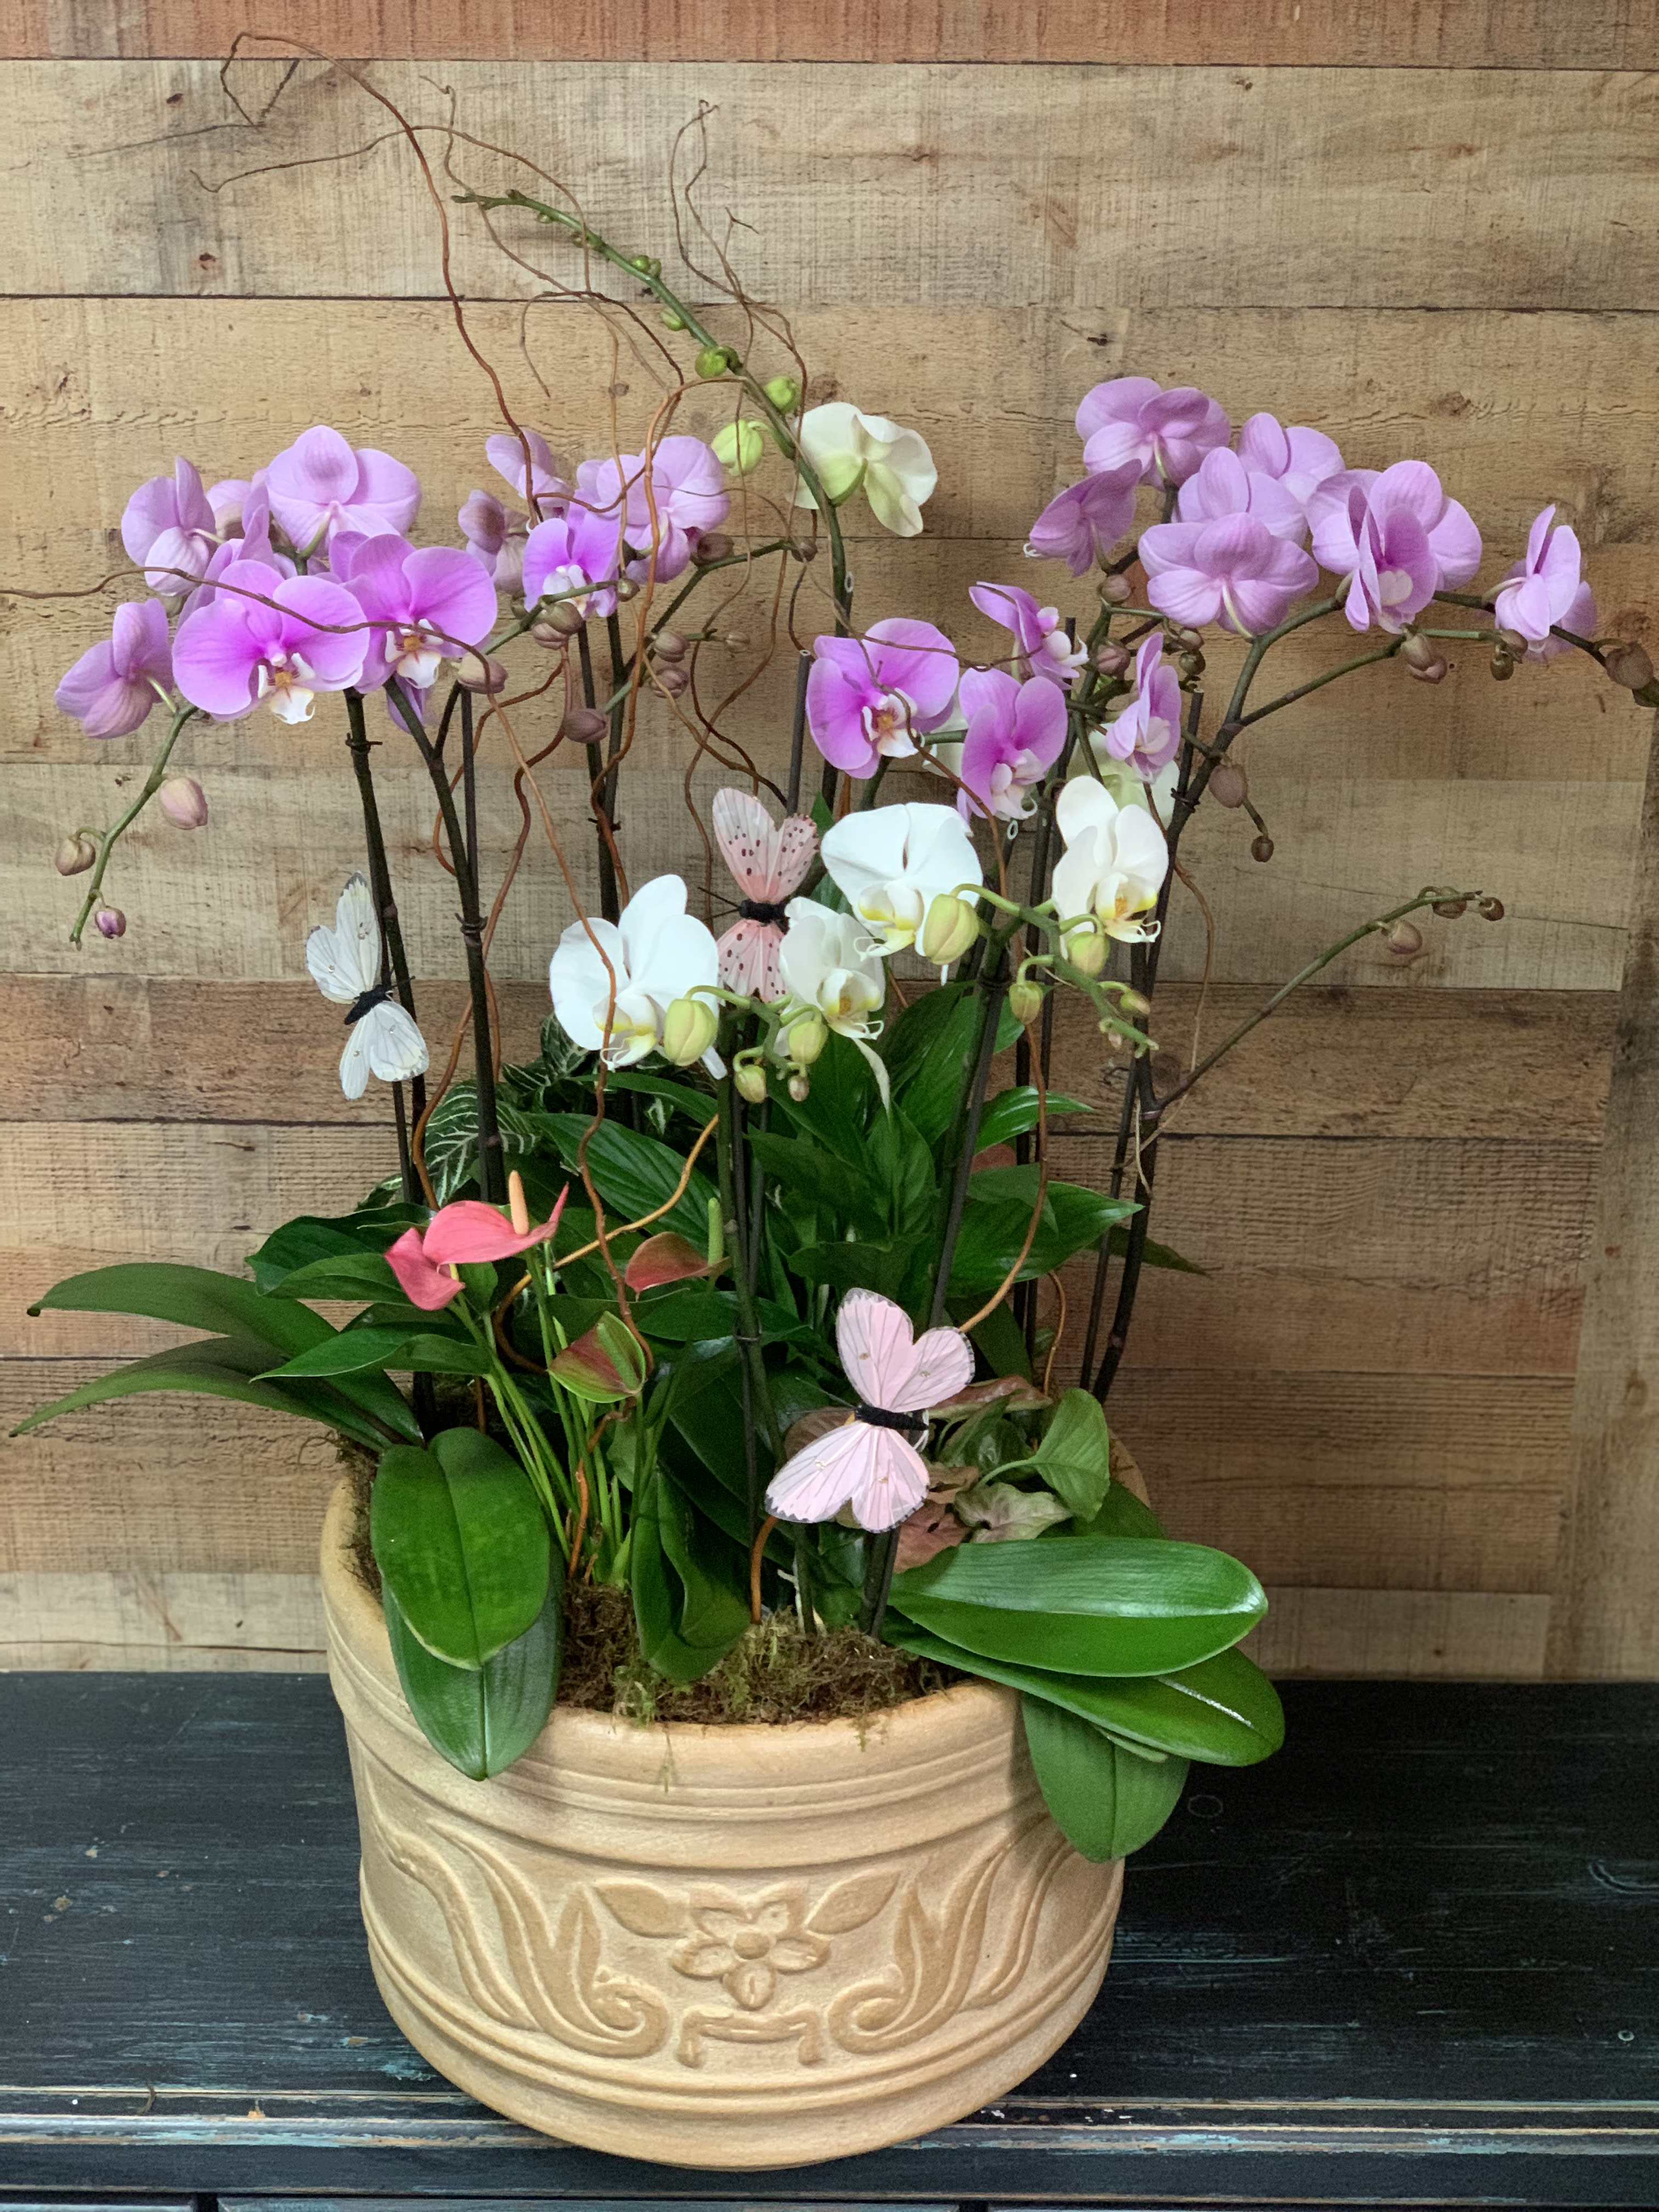 Orchid Garden - Beautiful phalaenopsis orchids arranged with green plants in a Pot.  Colors of orchids and container may vary due to availability. If you would like to request a certain color of orchids or containers please put in special instructions and we will contact you.  